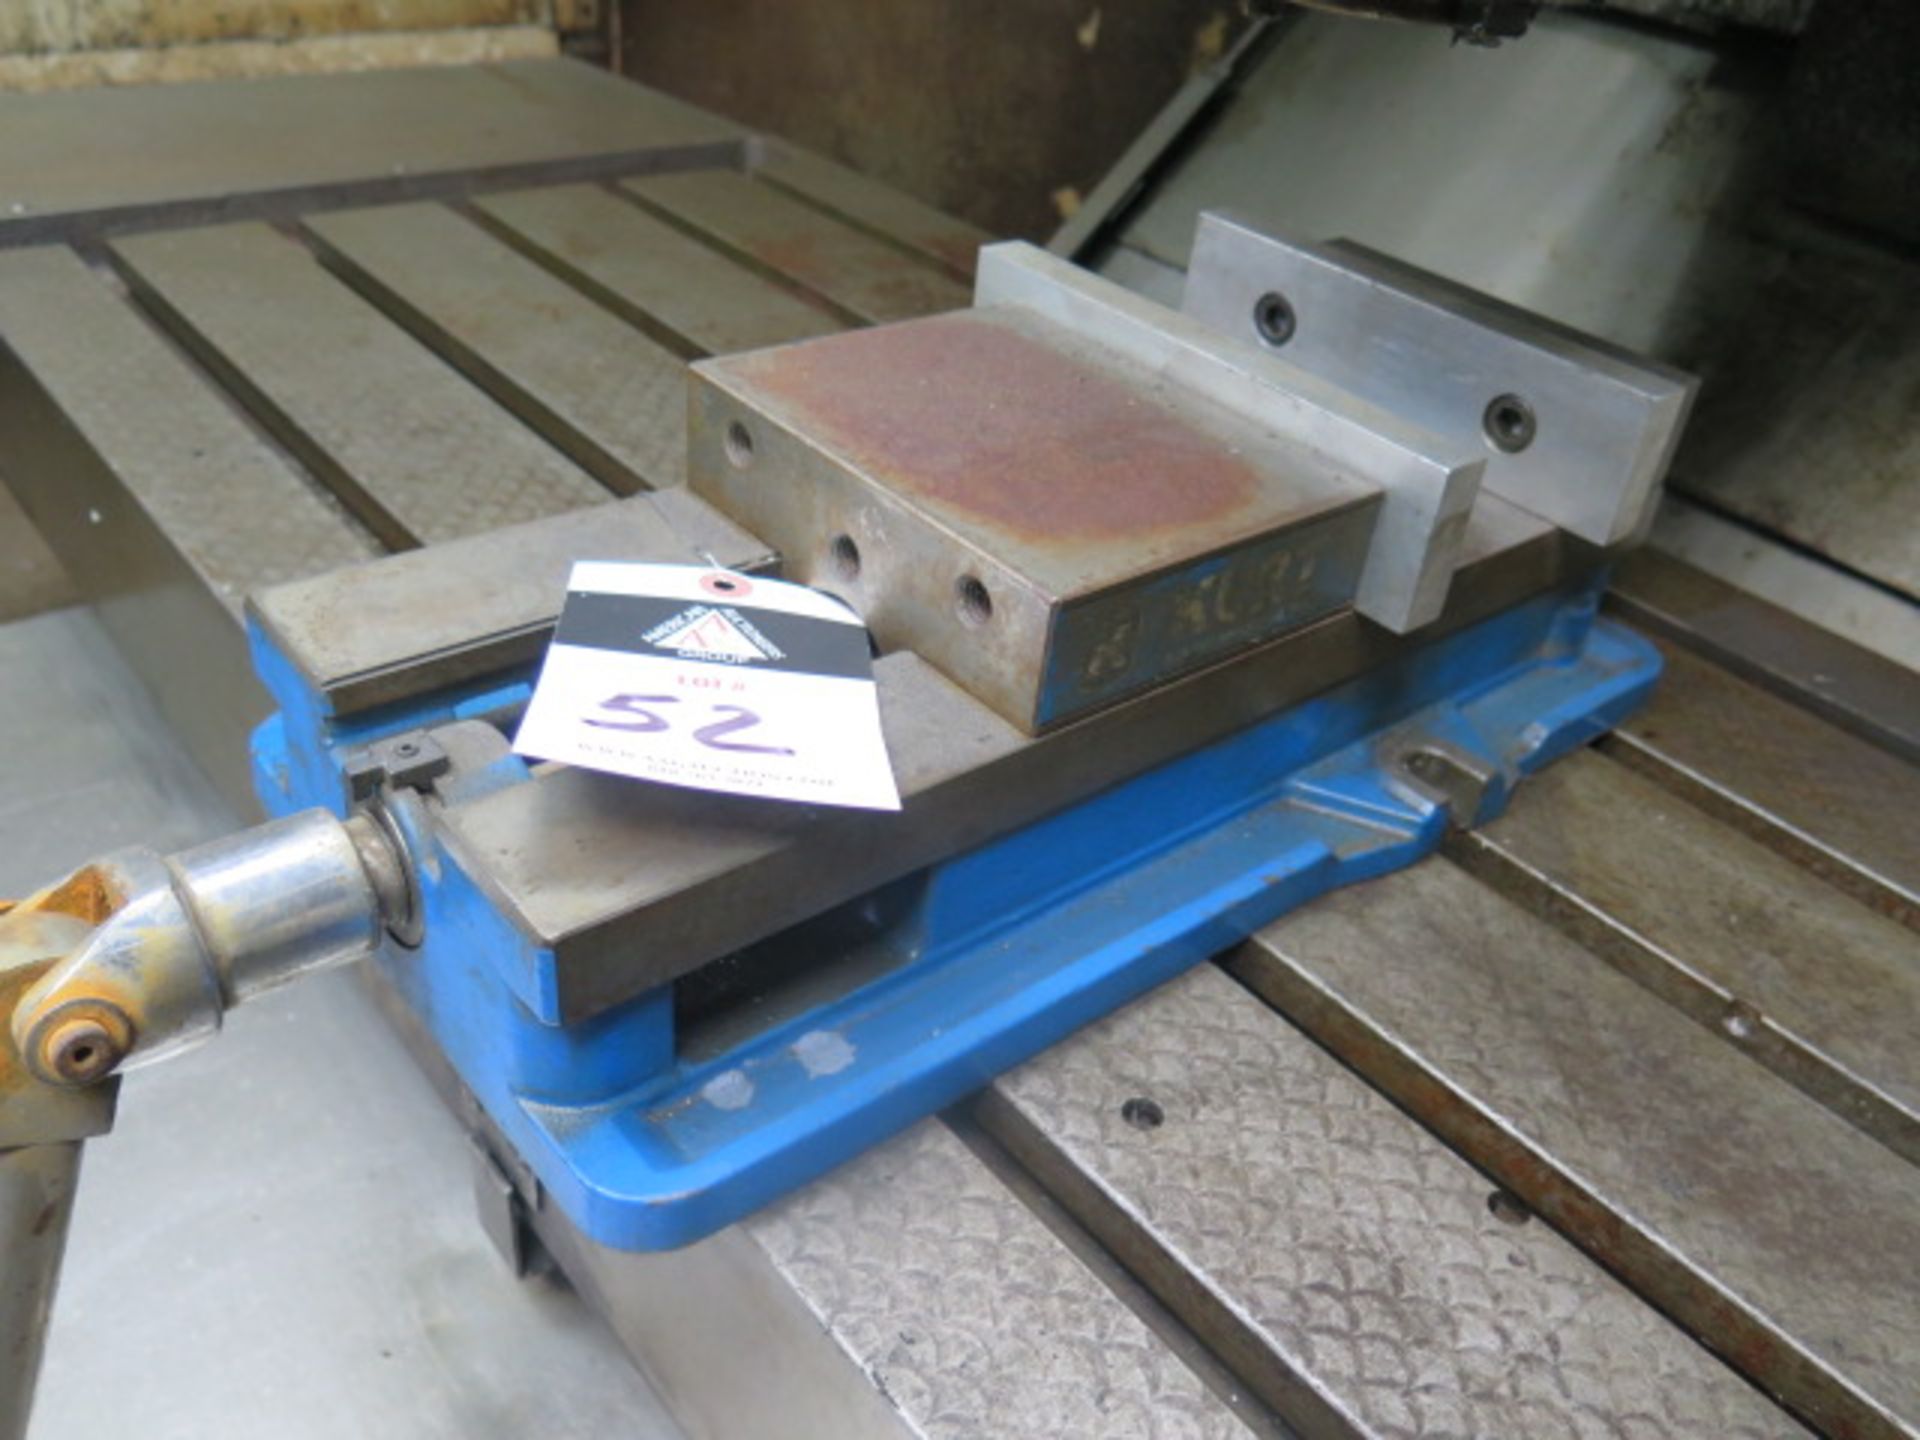 Kurt 6" Angle-Lock Vise (SOLD AS-IS - NO WARRANTY) - Image 2 of 4